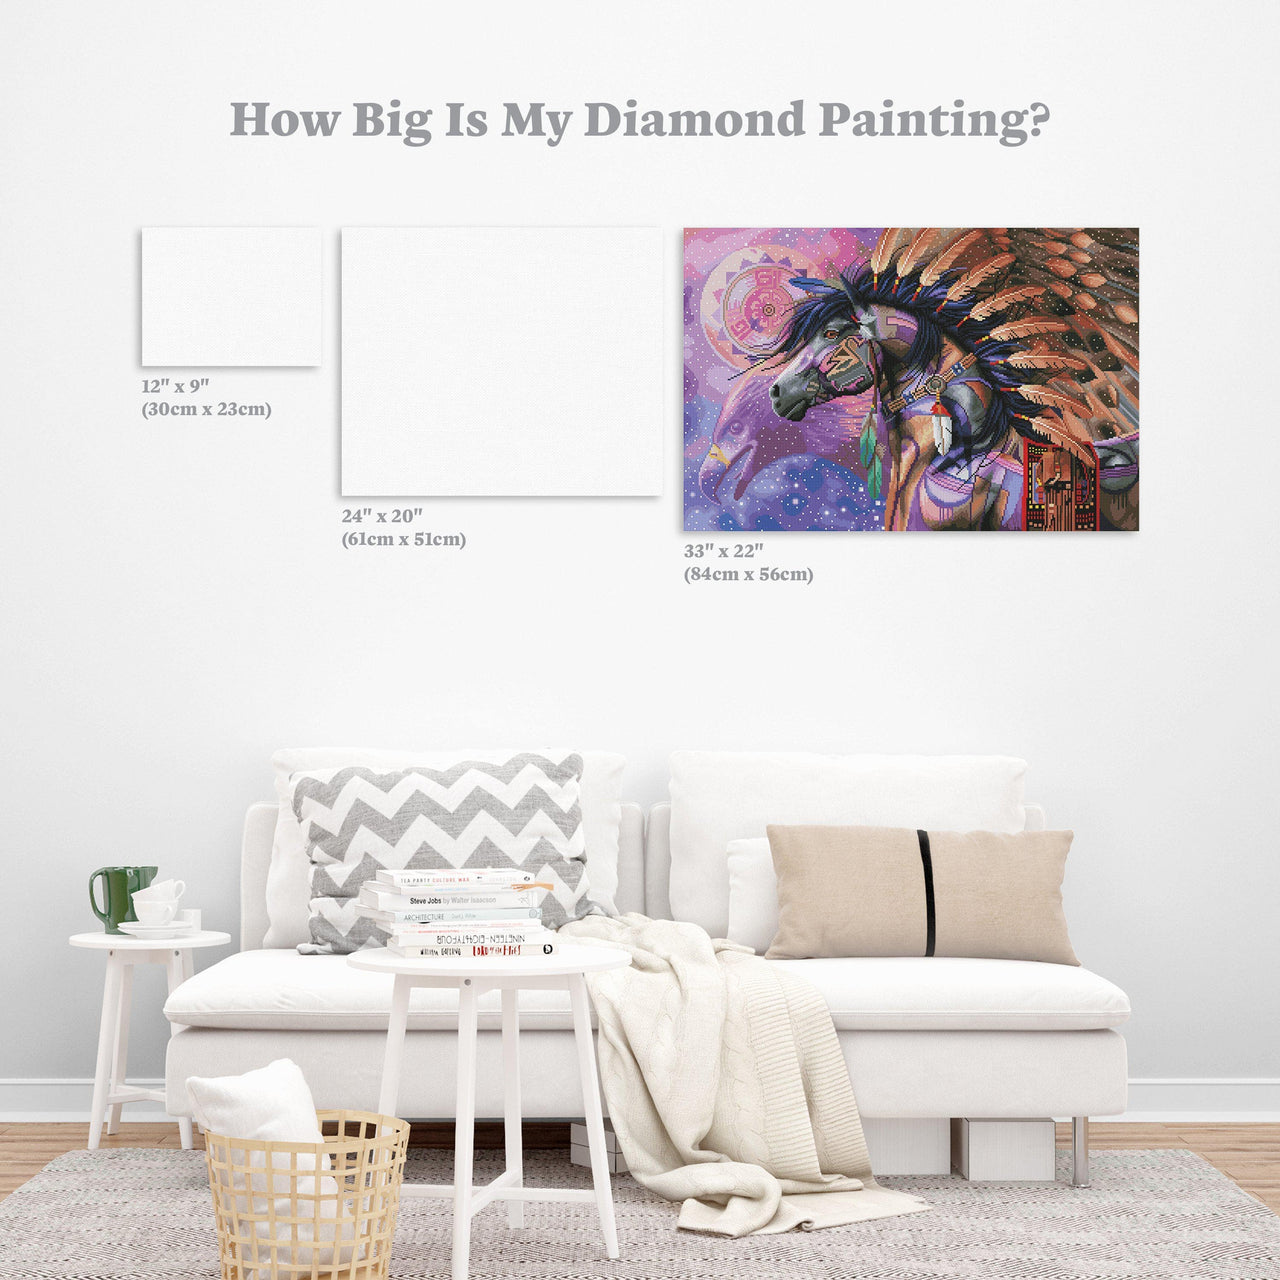 Diamond Painting Shaman 33" x 22″ (84cm x 56cm) / Round with 52 Colors including 2 ABs / 59,502